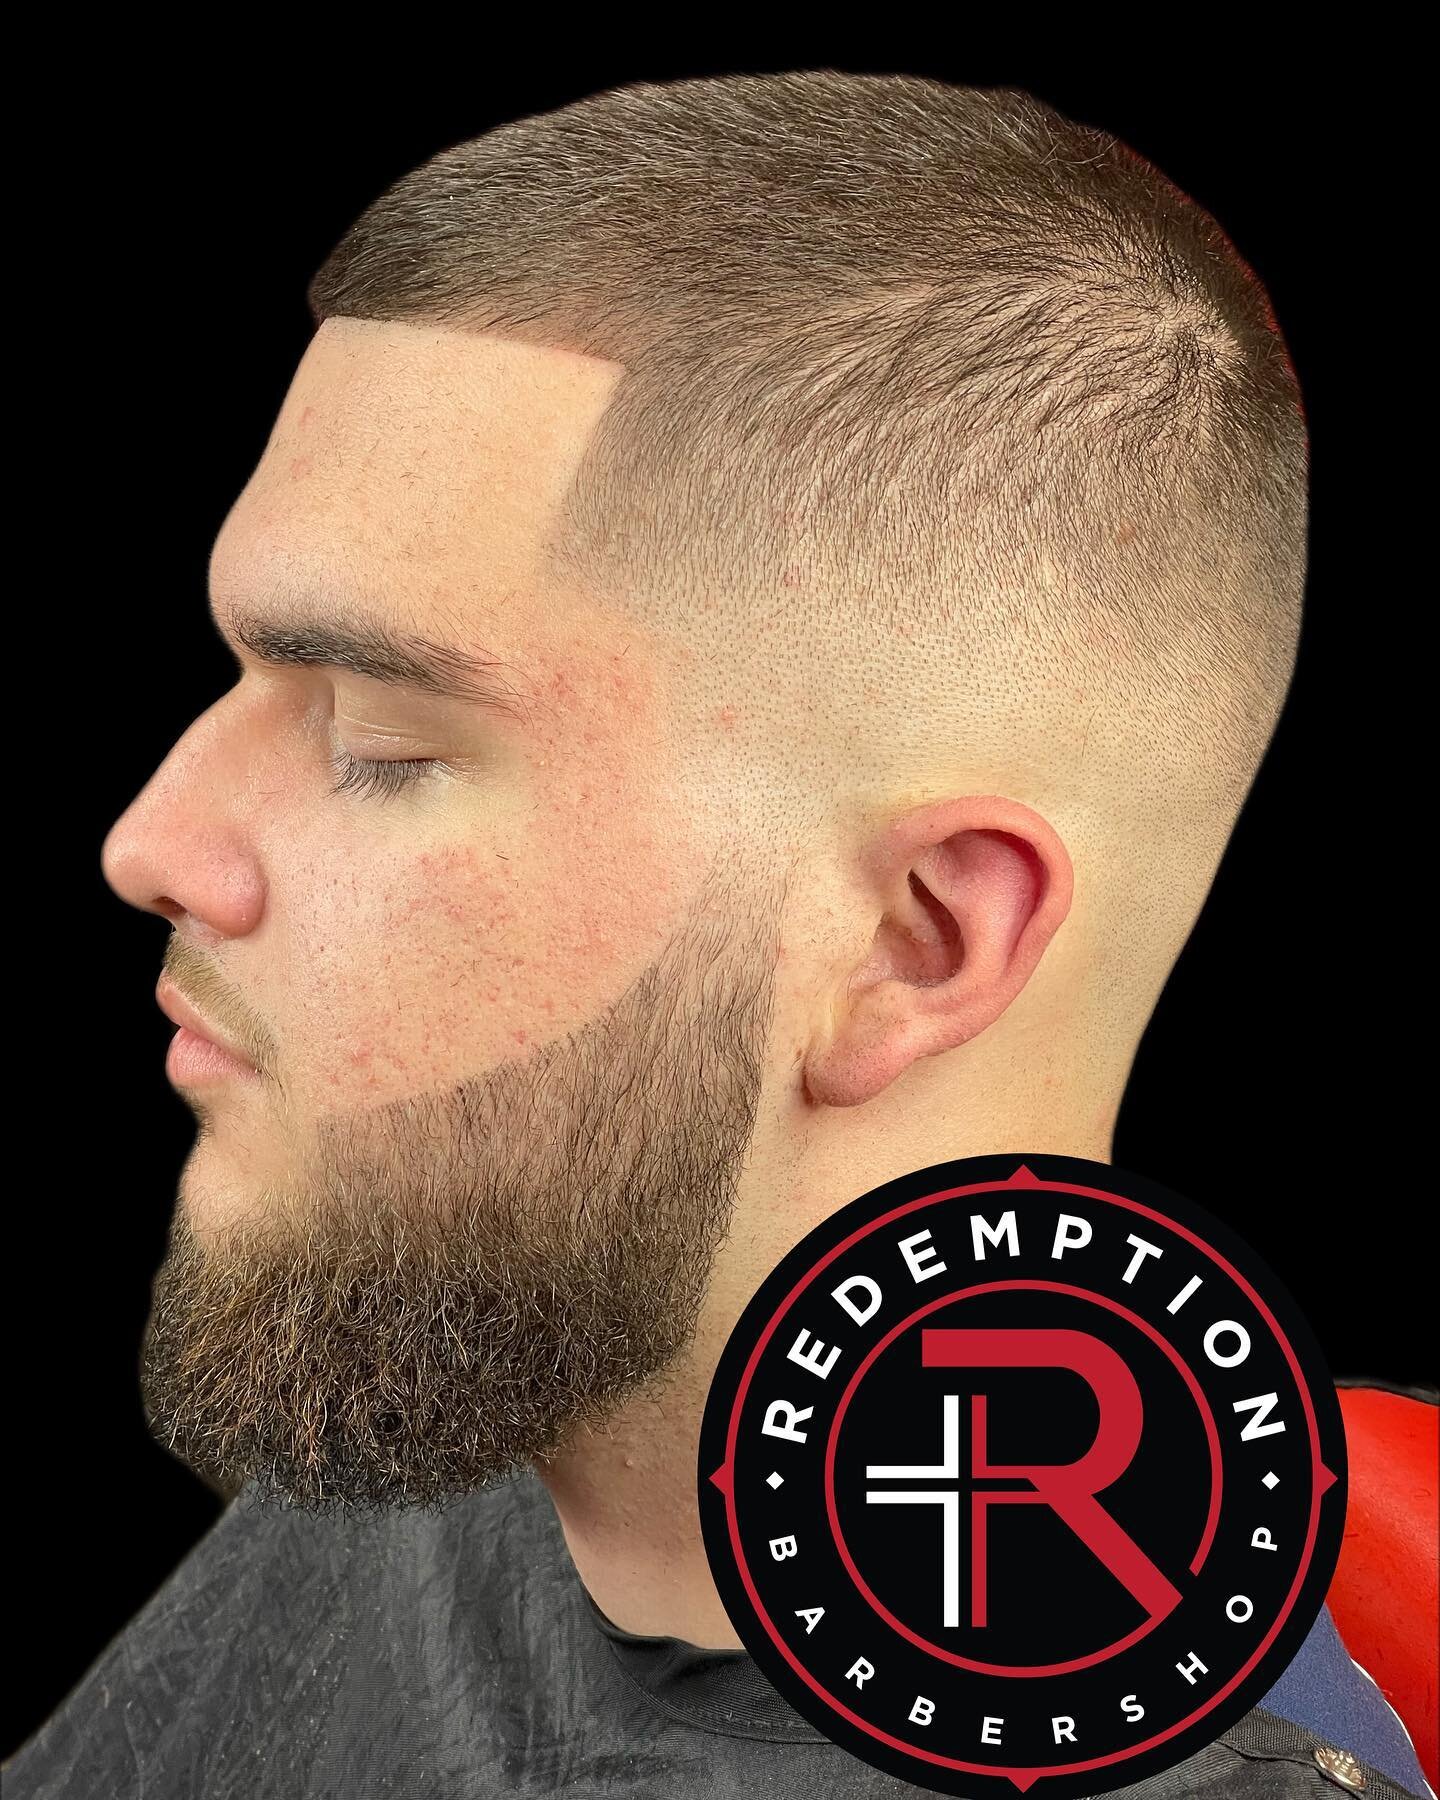 Not just a haircut but a experience at Redemption Barbershop&hellip;#barberbishop #barber #barberworld #barbernation #barbergang #barberlifestyle #barberhub #barberpost #barbergame #barbershop #beard #bearded